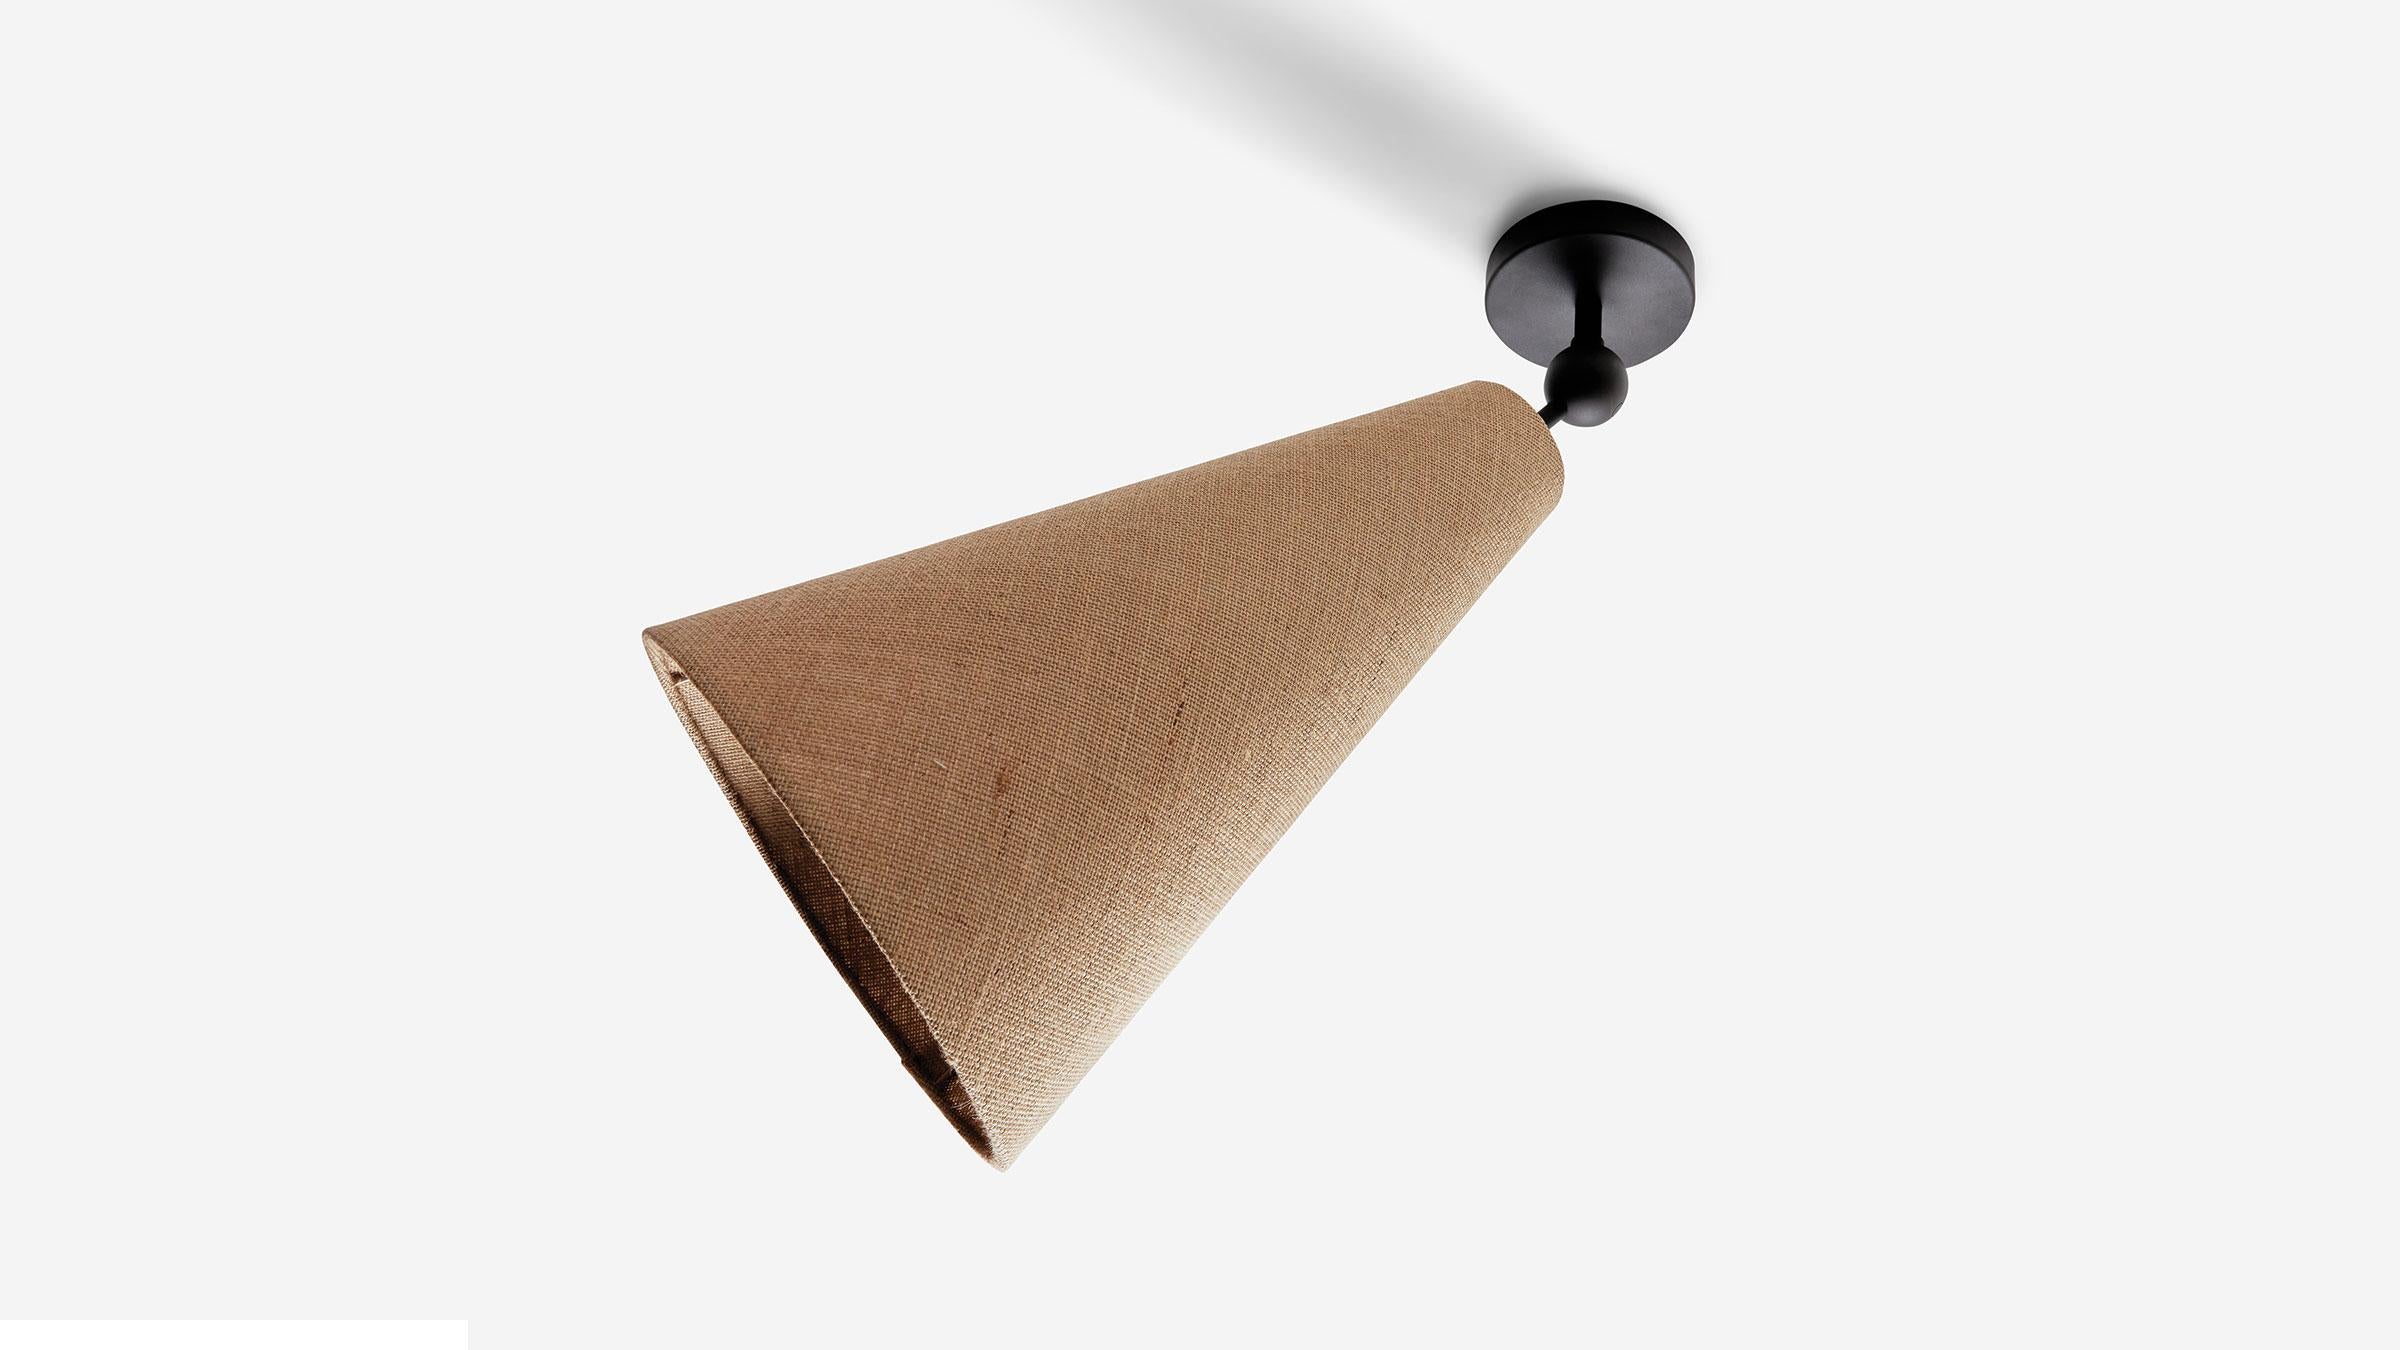 Pendolo Flush Mount is a versatile flush-mount fixture, capable of serving as a down-light or directional wall washer. Available in either Natural Burlap or Natural Linen, the cone form is expressed as a singular gesture against a ceiling. UL